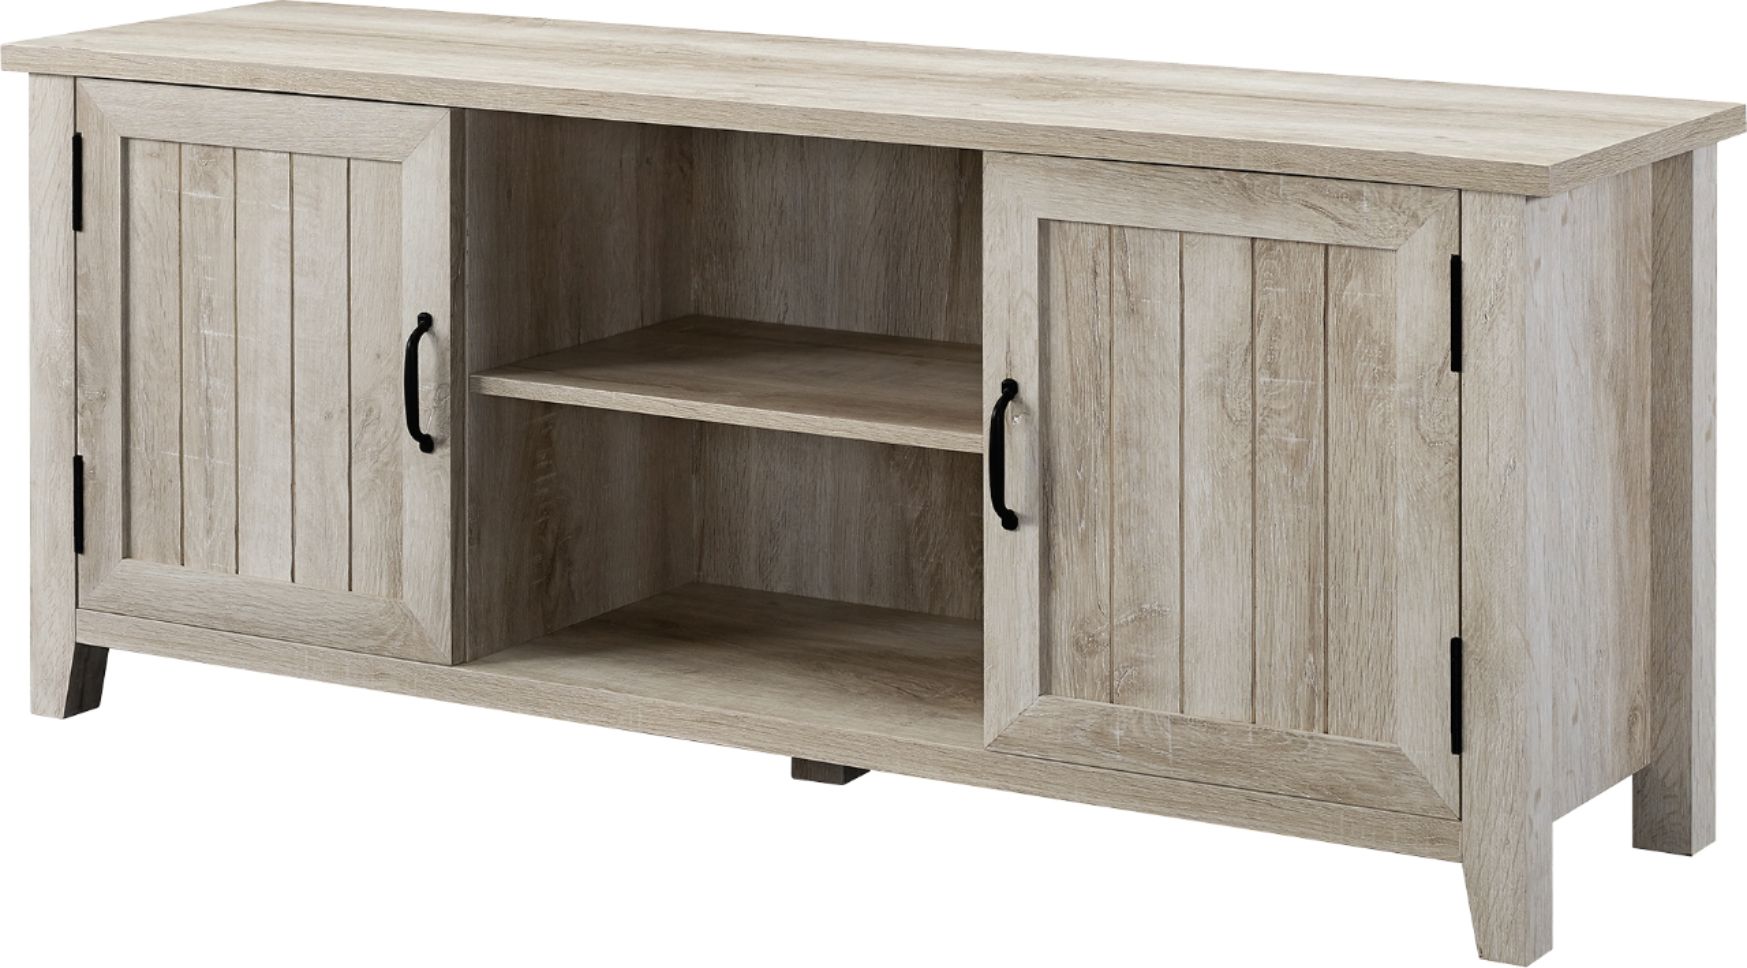 Left View: Walker Edison - Modern Farmhouse TV Stand for Most TVs Up to 64" - White Oak